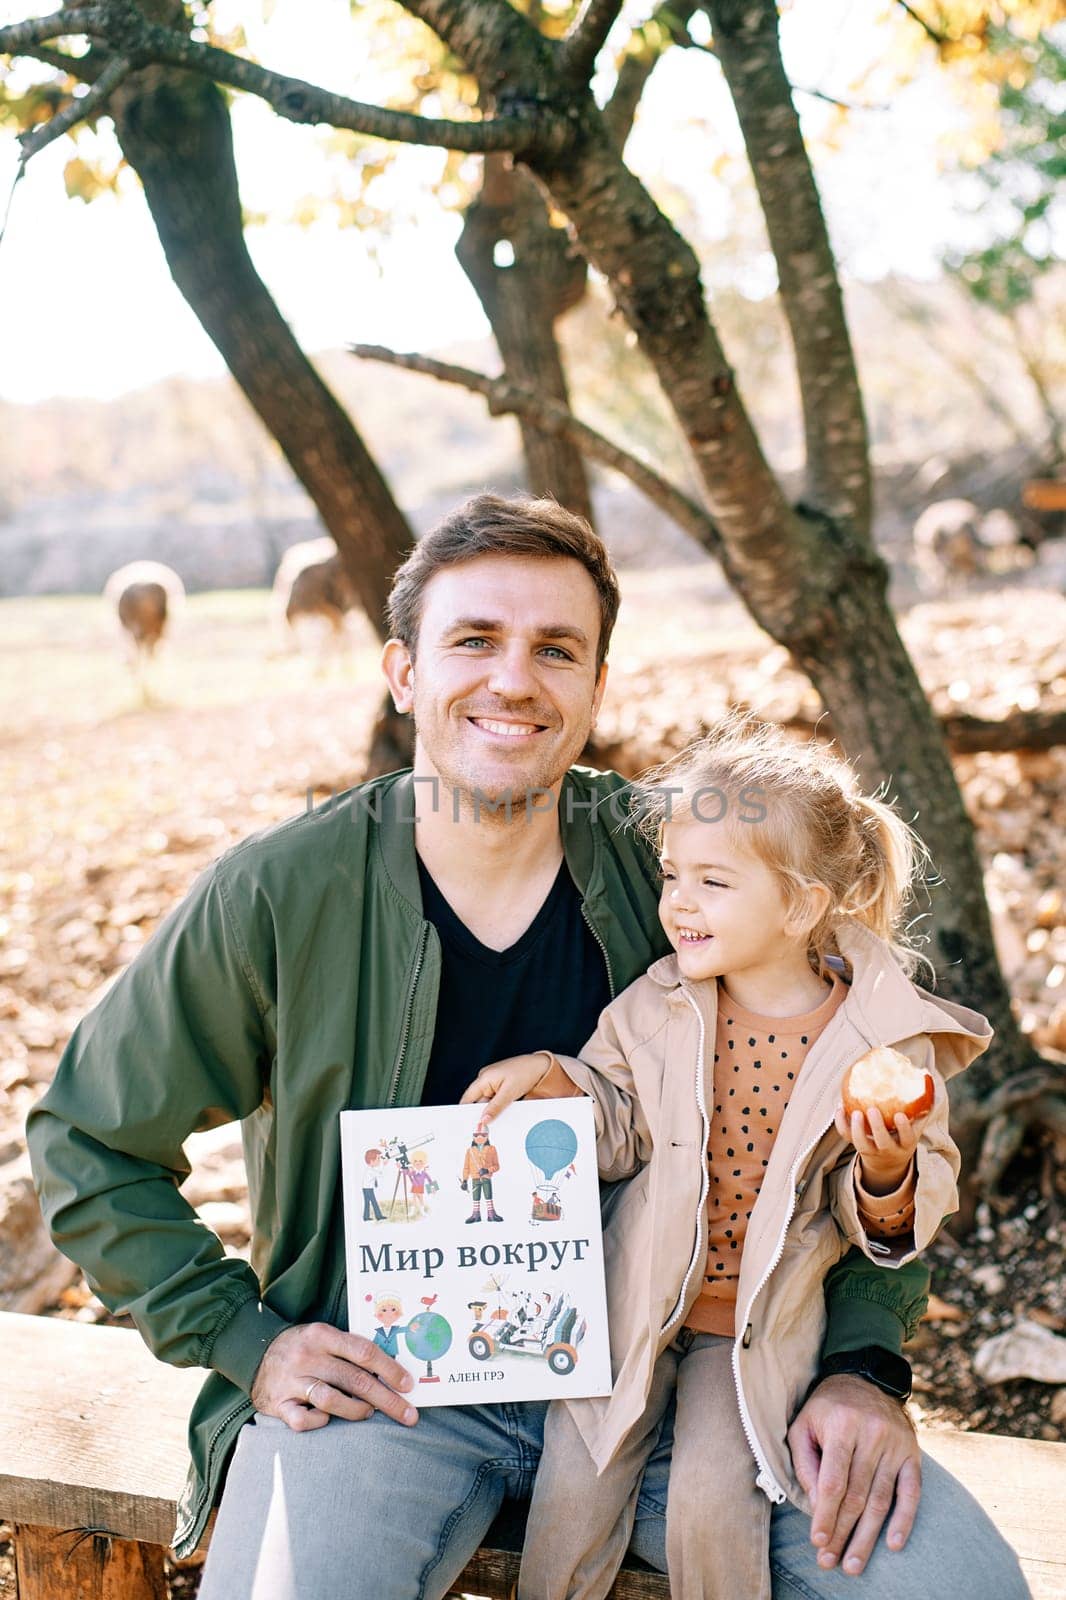 Smiling dad with a little girl on his lap sits on a bench with a book in his hands. Caption: World around. High quality photo